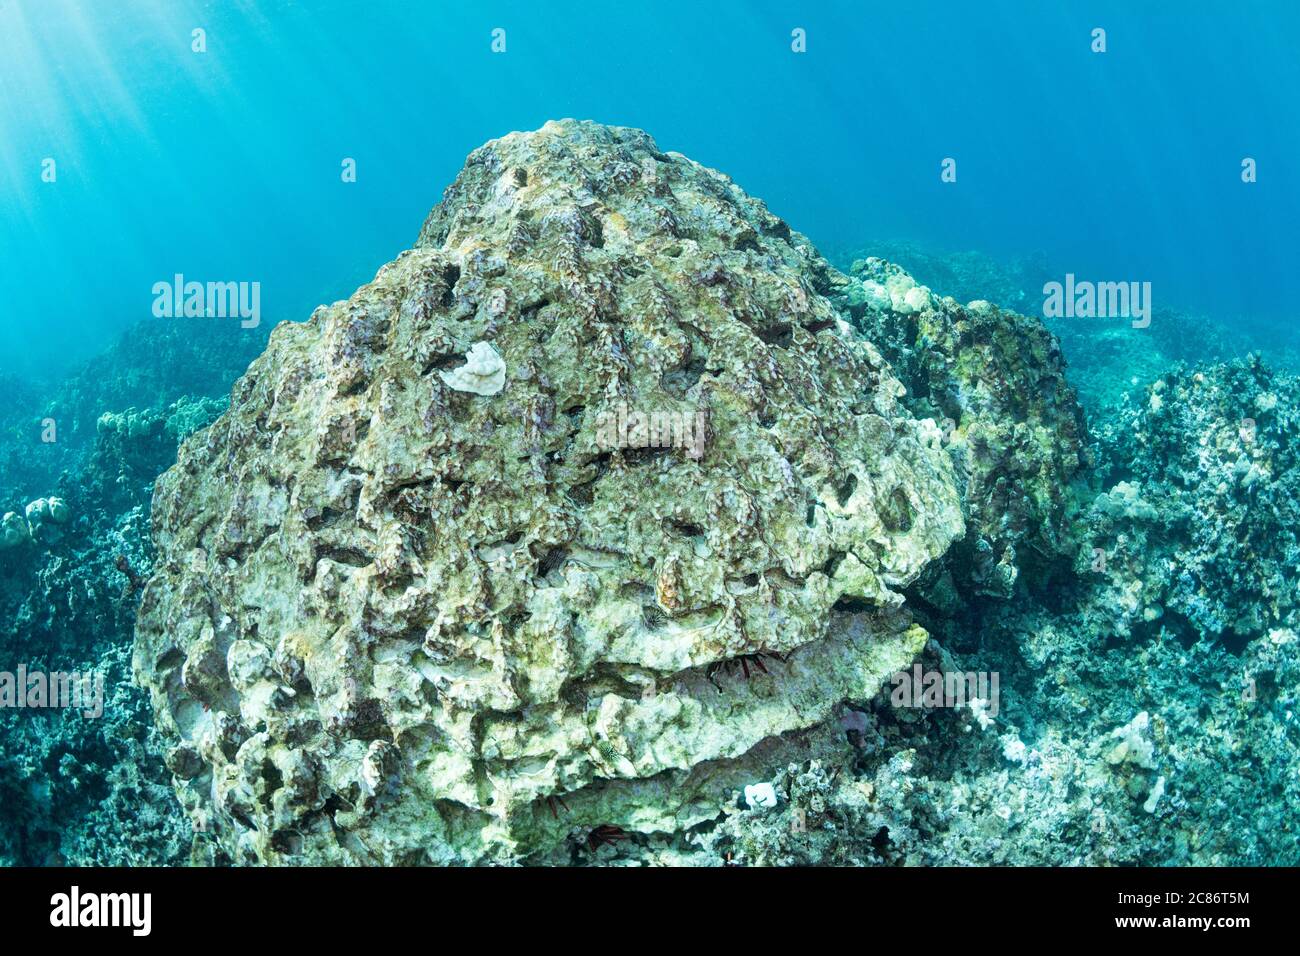 a large head of lobe coralthat died from bleaching has a light coat of green algae and scrape marks from parrotfish feeding on the algae, Kona, Hawaii Stock Photo